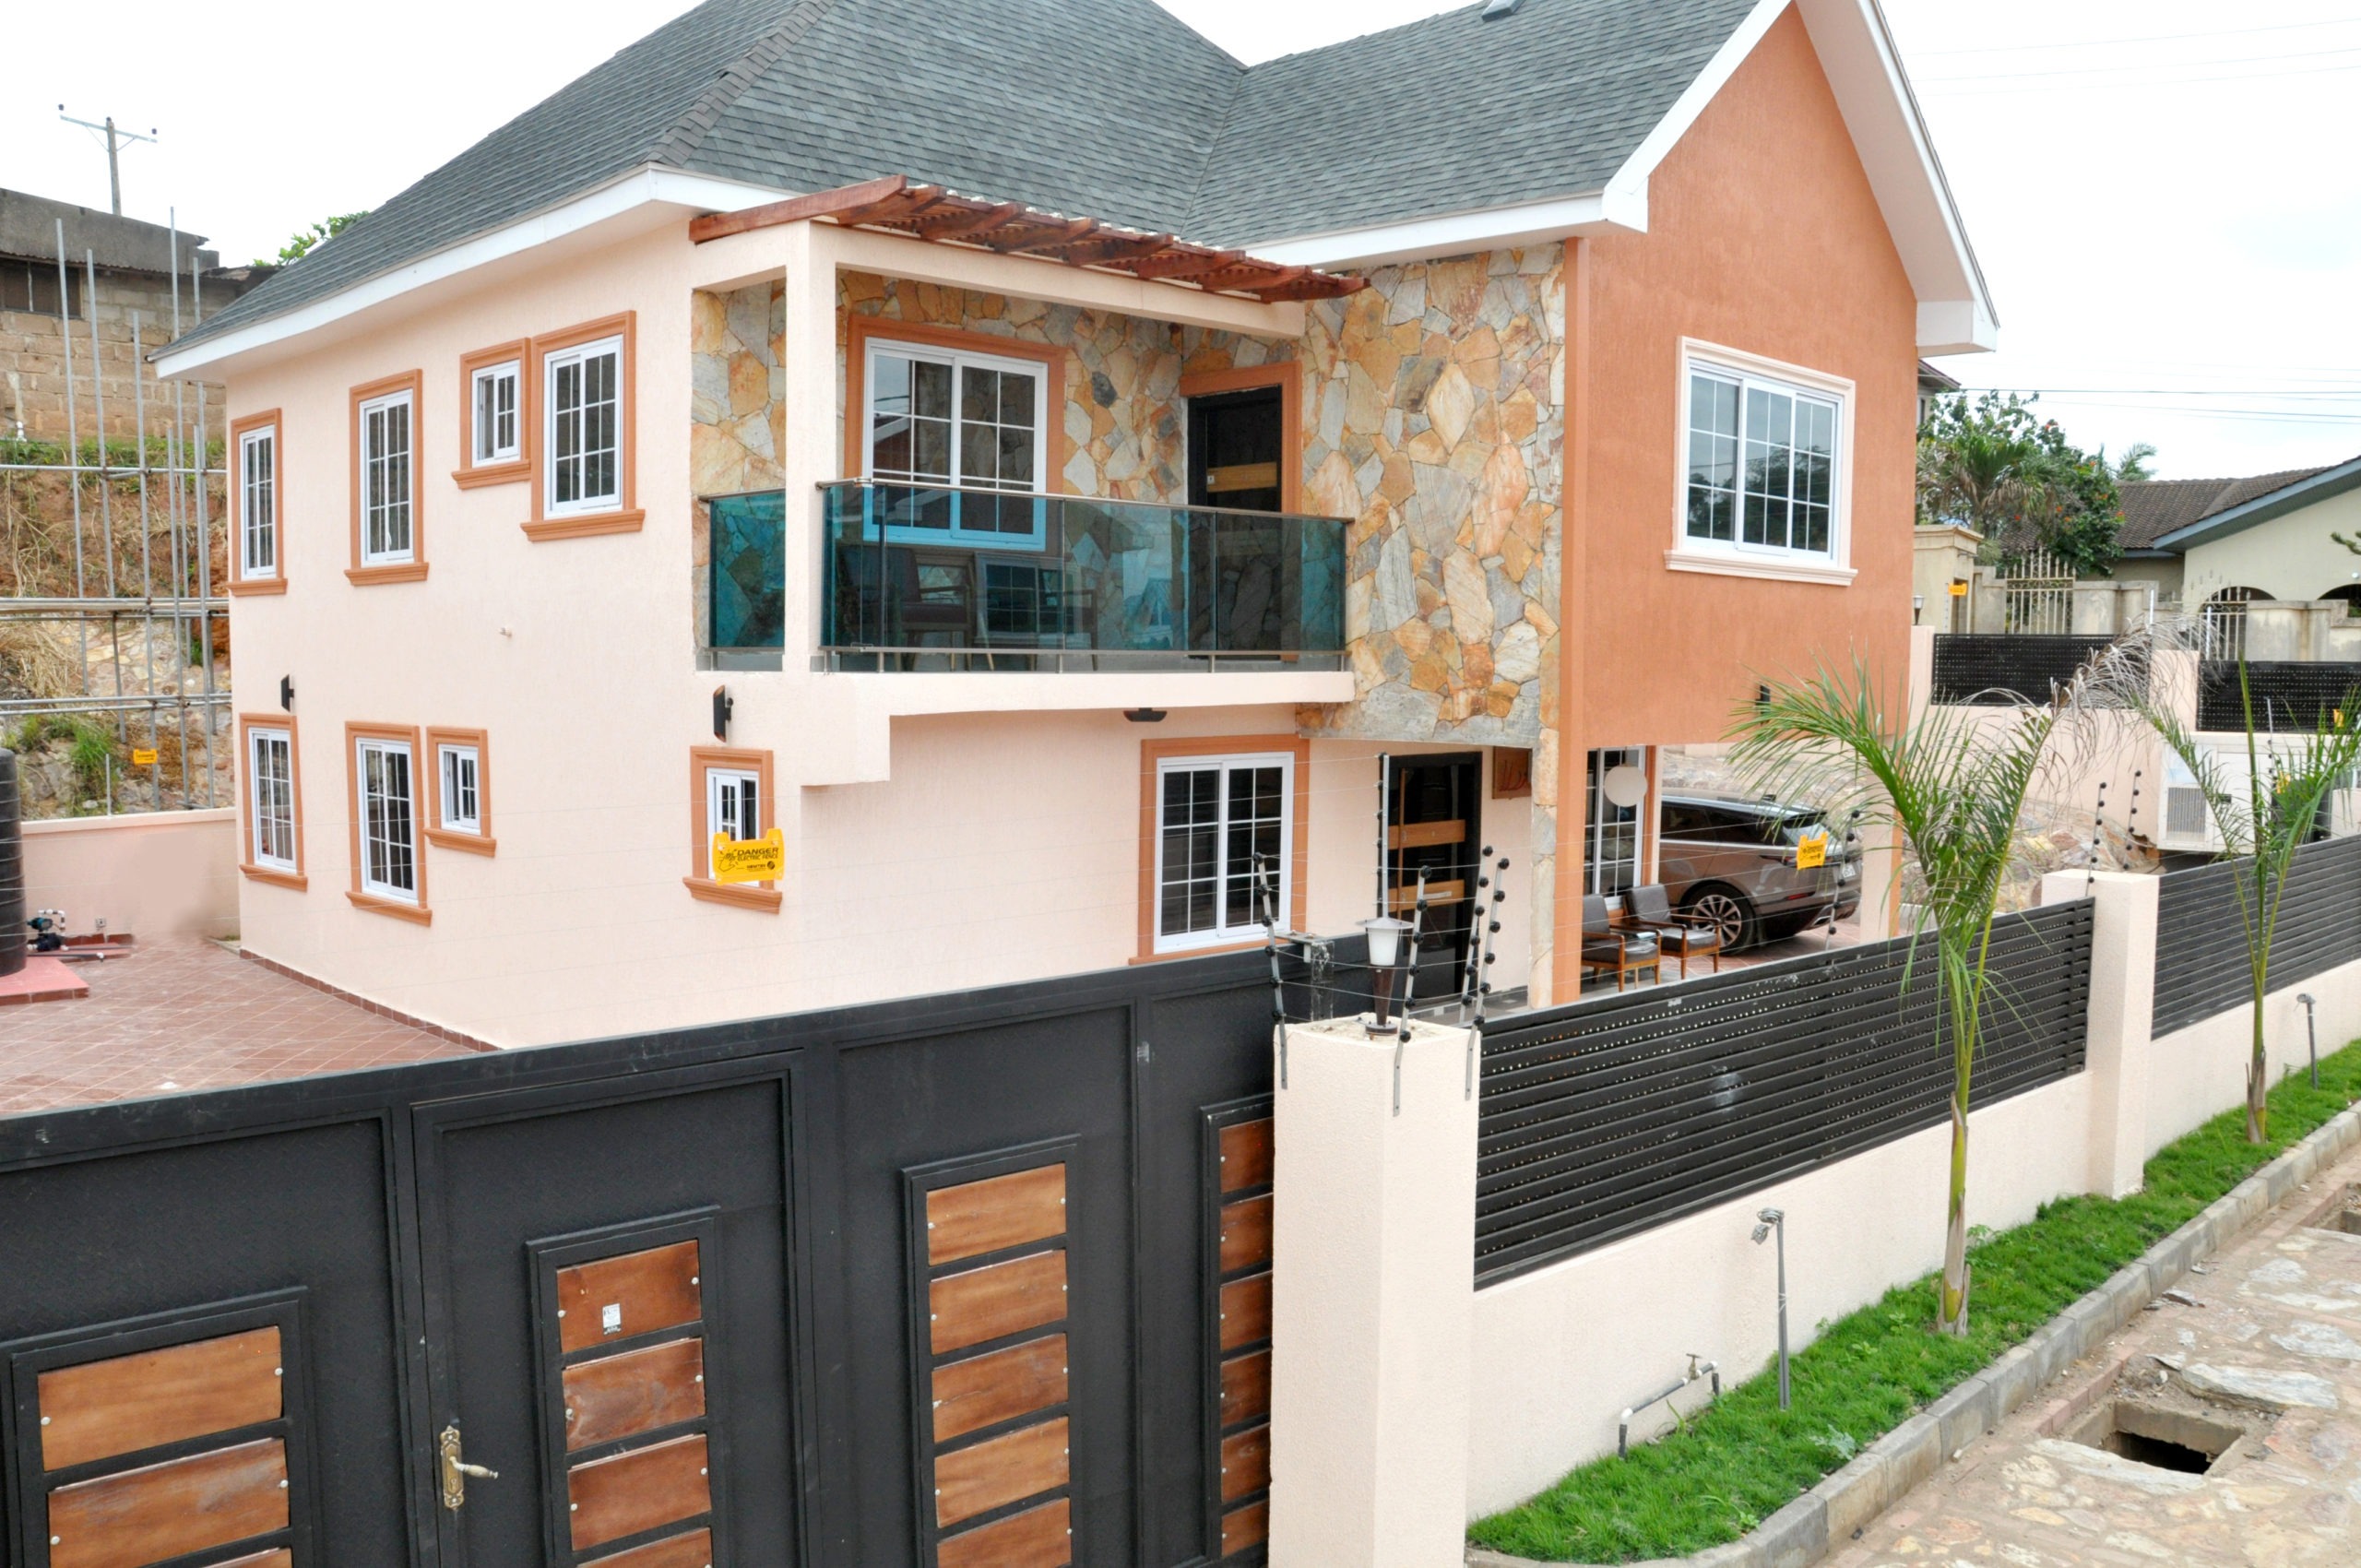 How To Buy Neglected Houses In Accra?